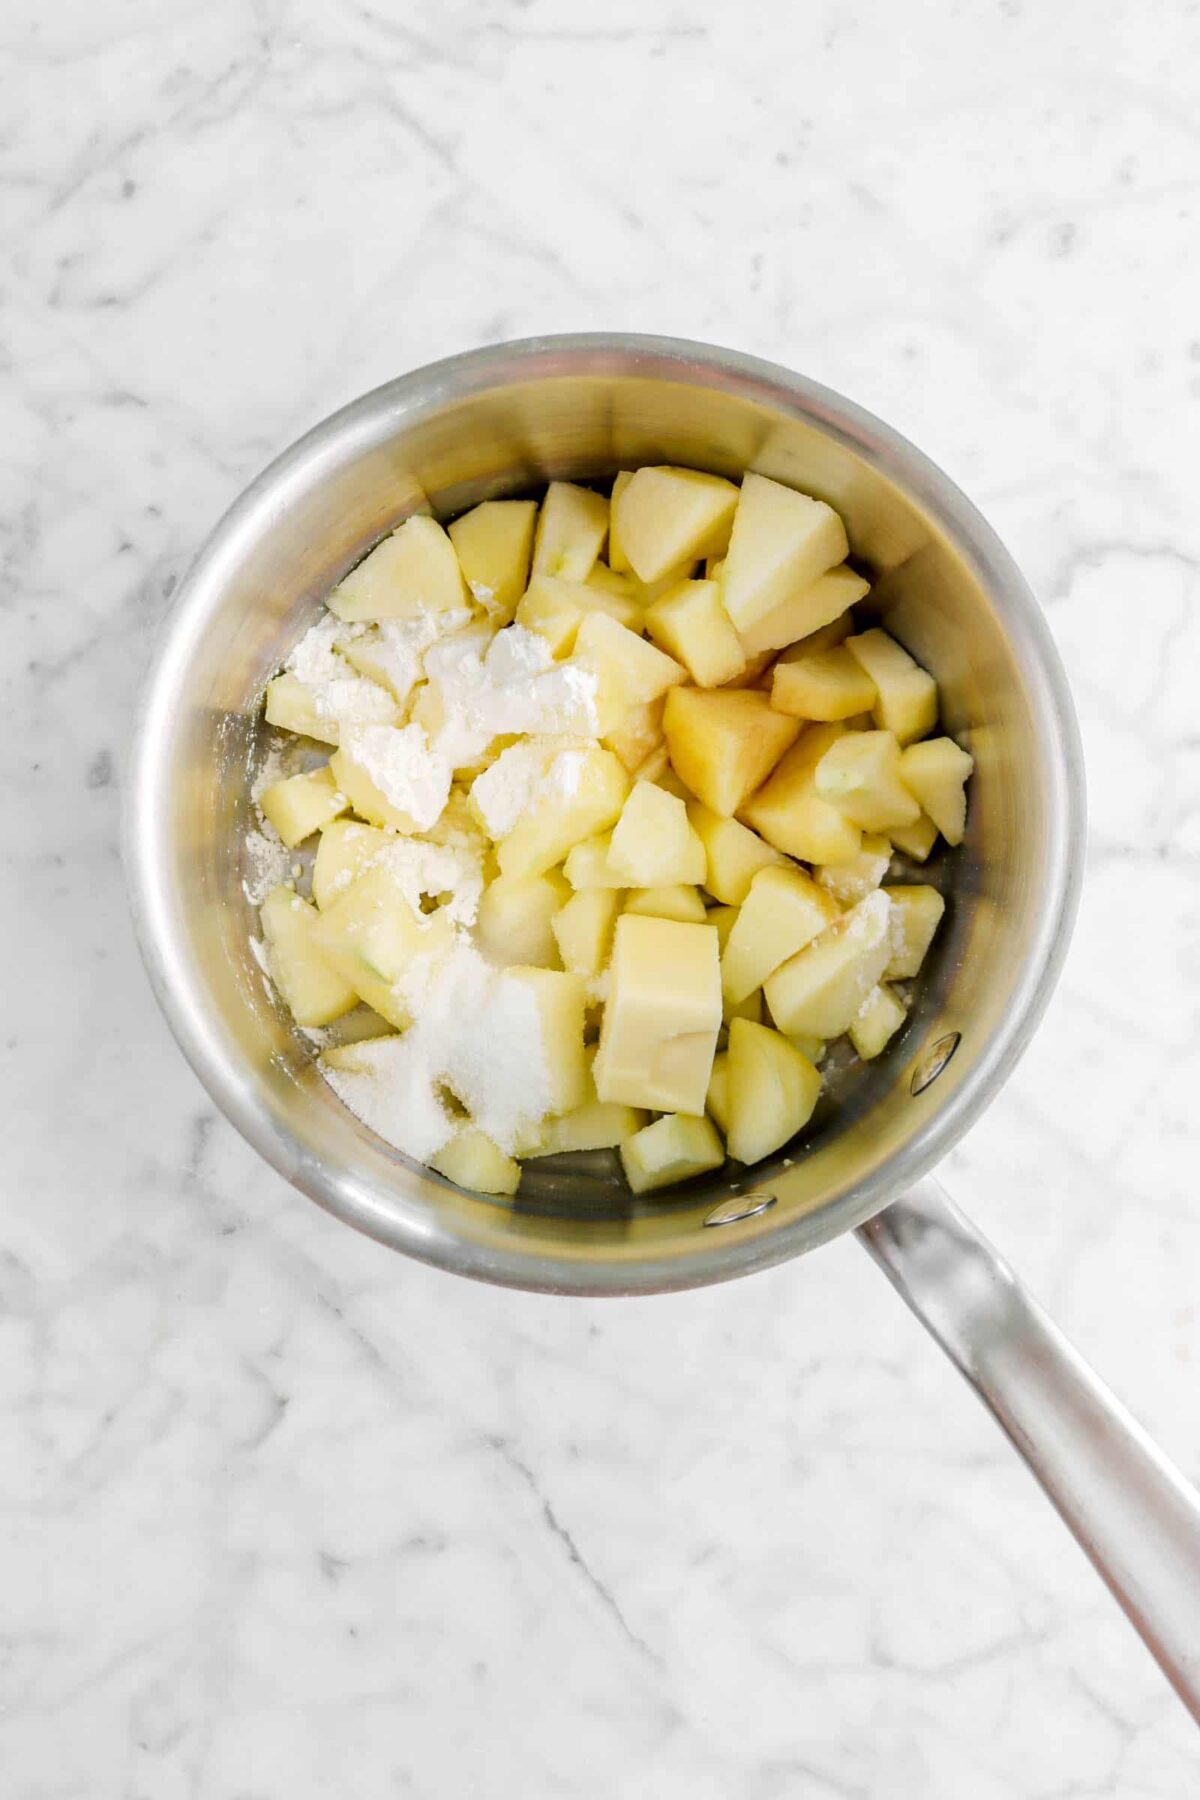 chopped apples, corn starch, vanilla, and sugar in a pot